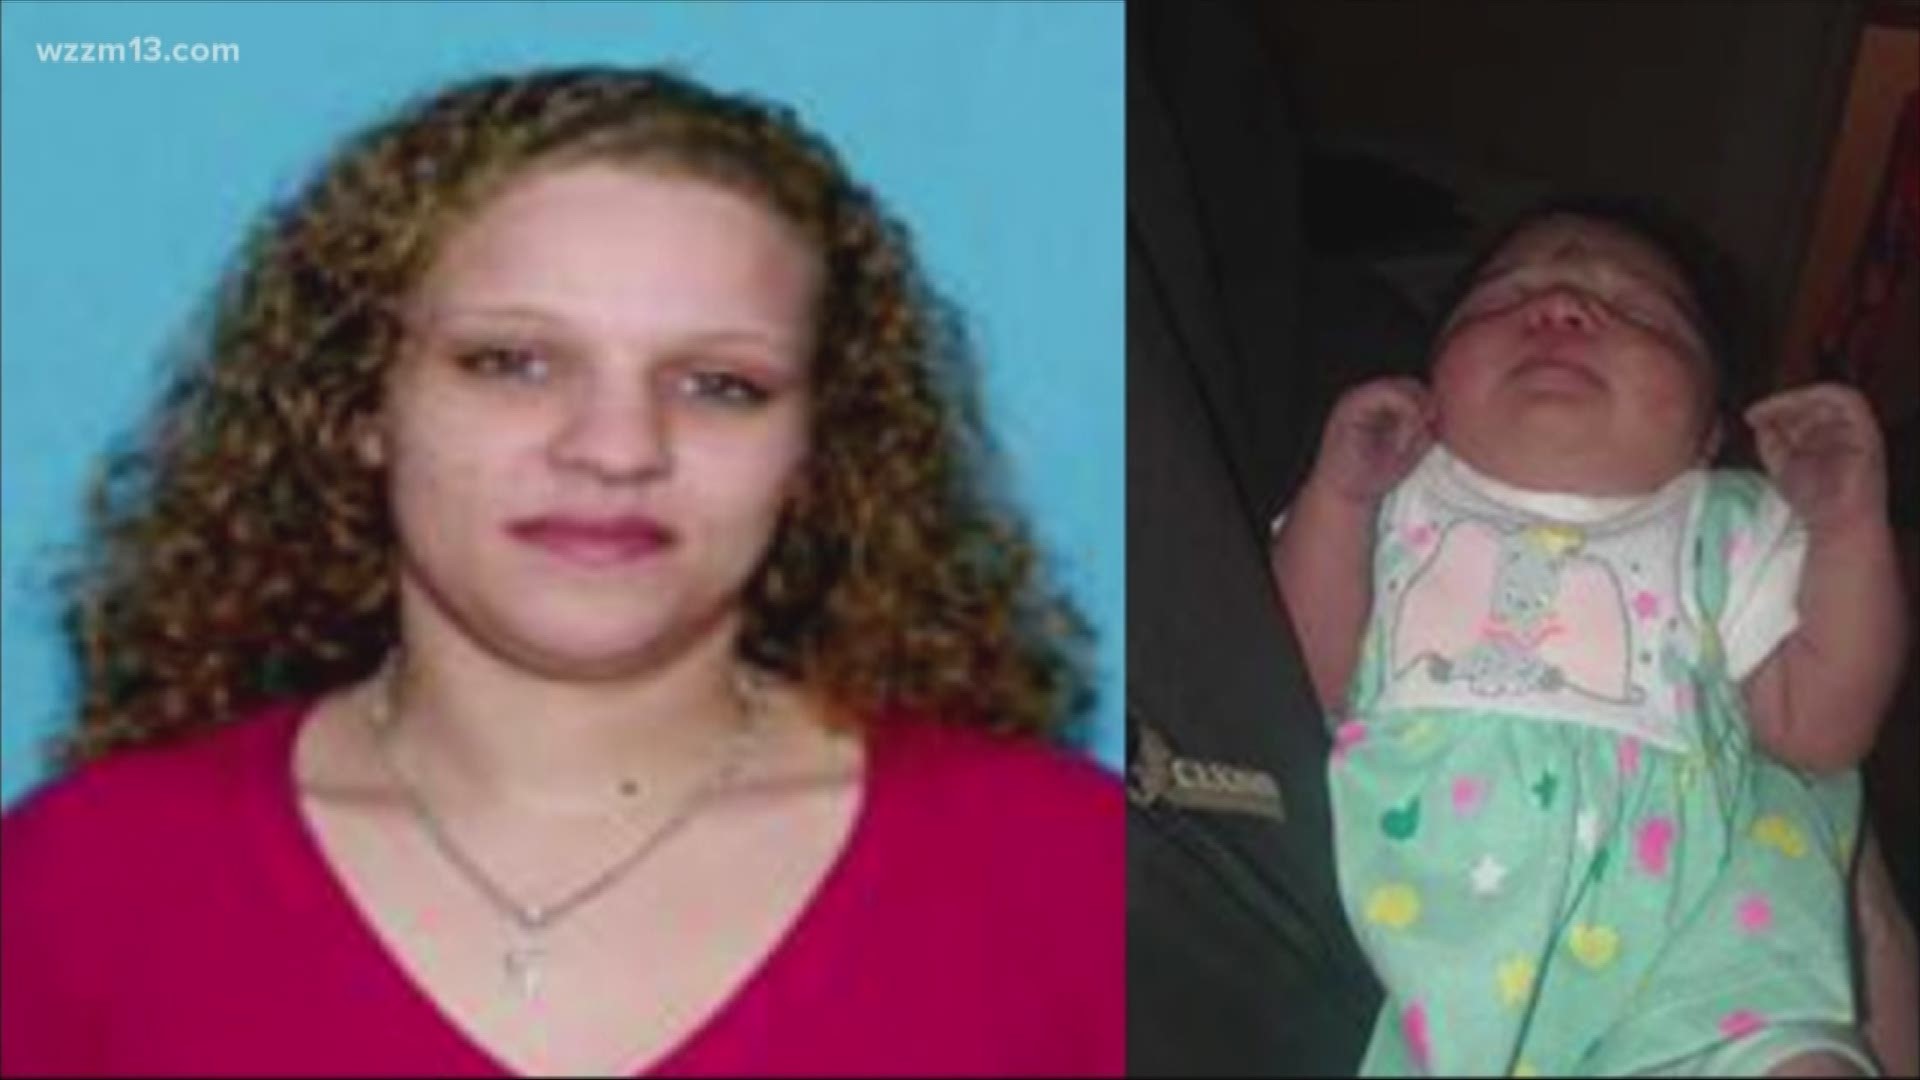 Police searching for missing 35-year-old Ashley Shade say they've found the body of her 6-day-old daughter in her car, now police are focusing on finding the woman.